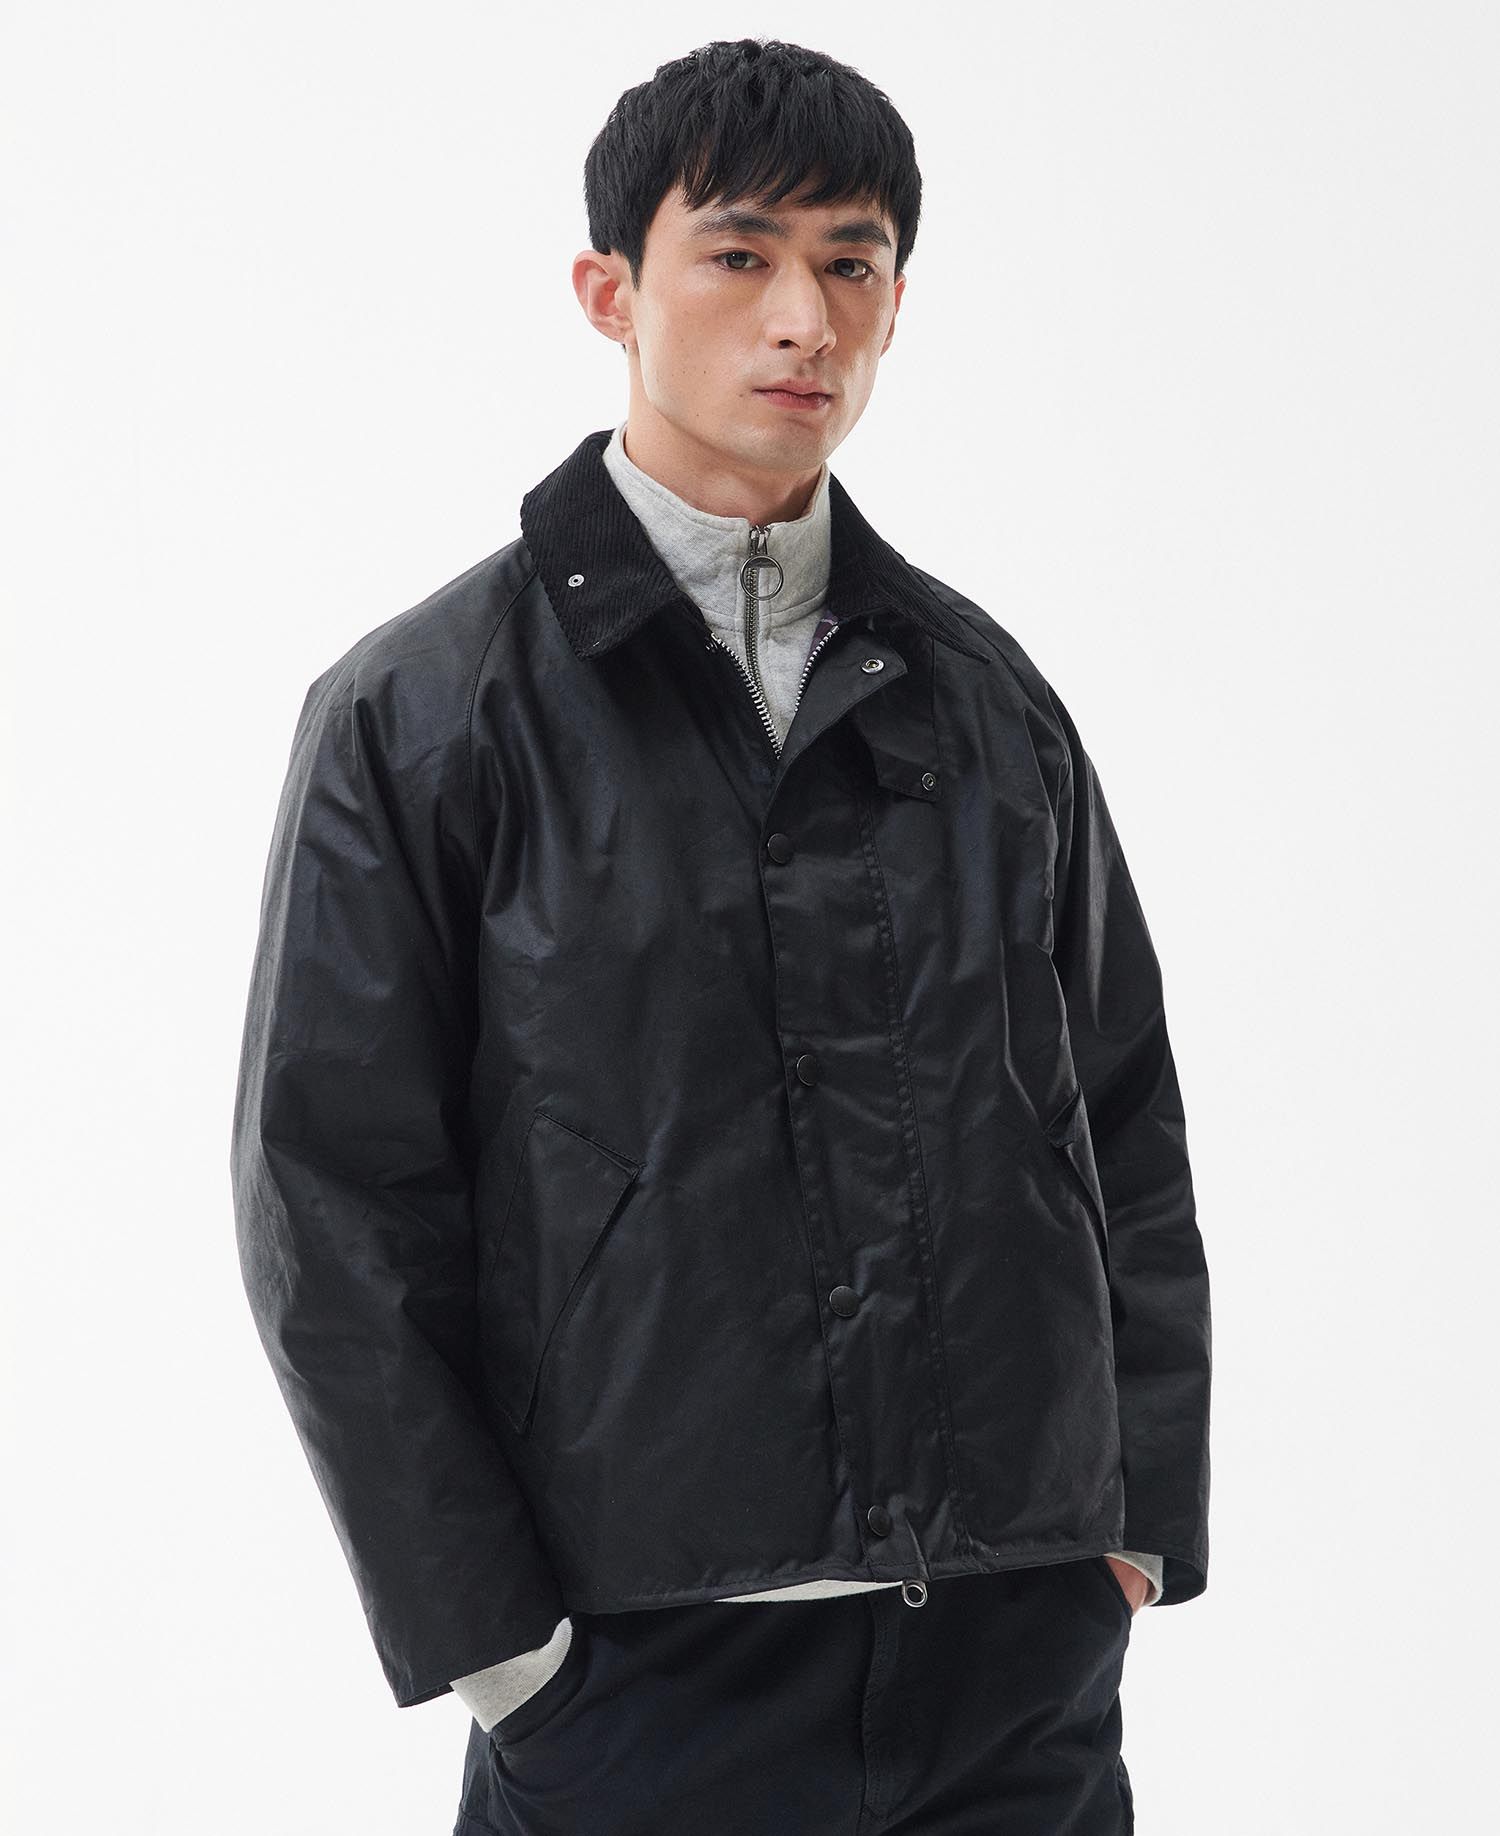 Shop the Barbour Transport Wax Jacket in Black today. | Barbour